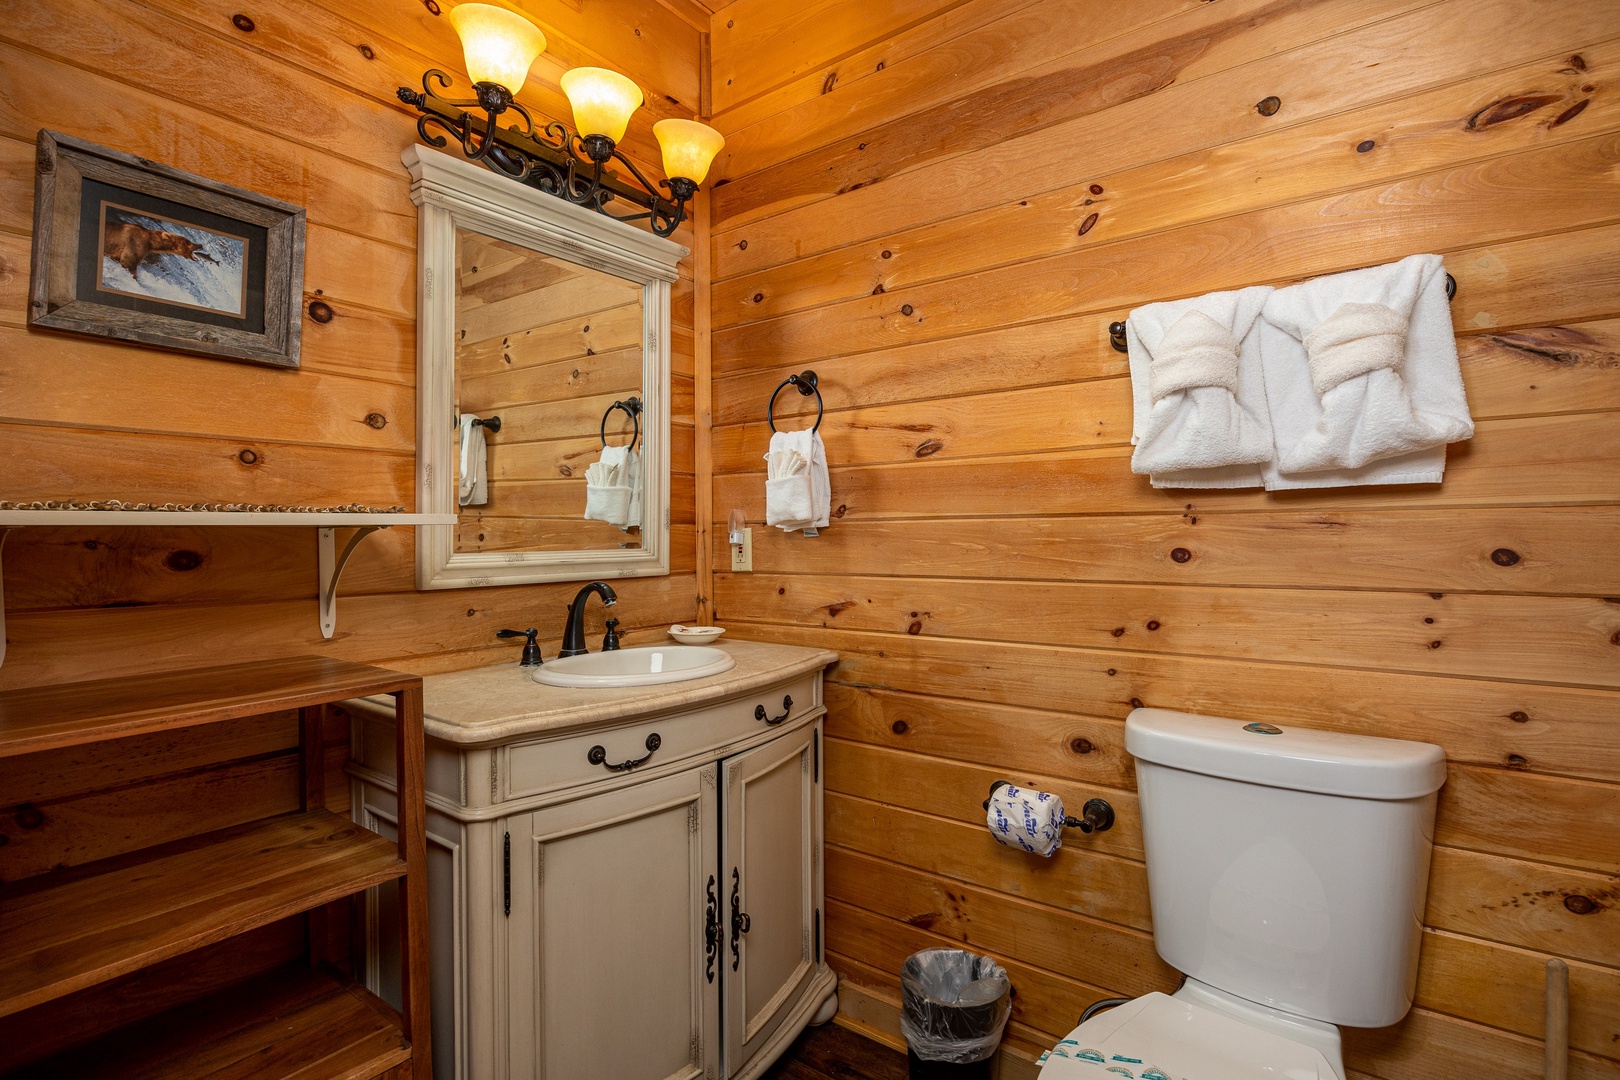 Bathroom at Eagle's Nest, a 2 bedroom cabin rental located in Sevierville